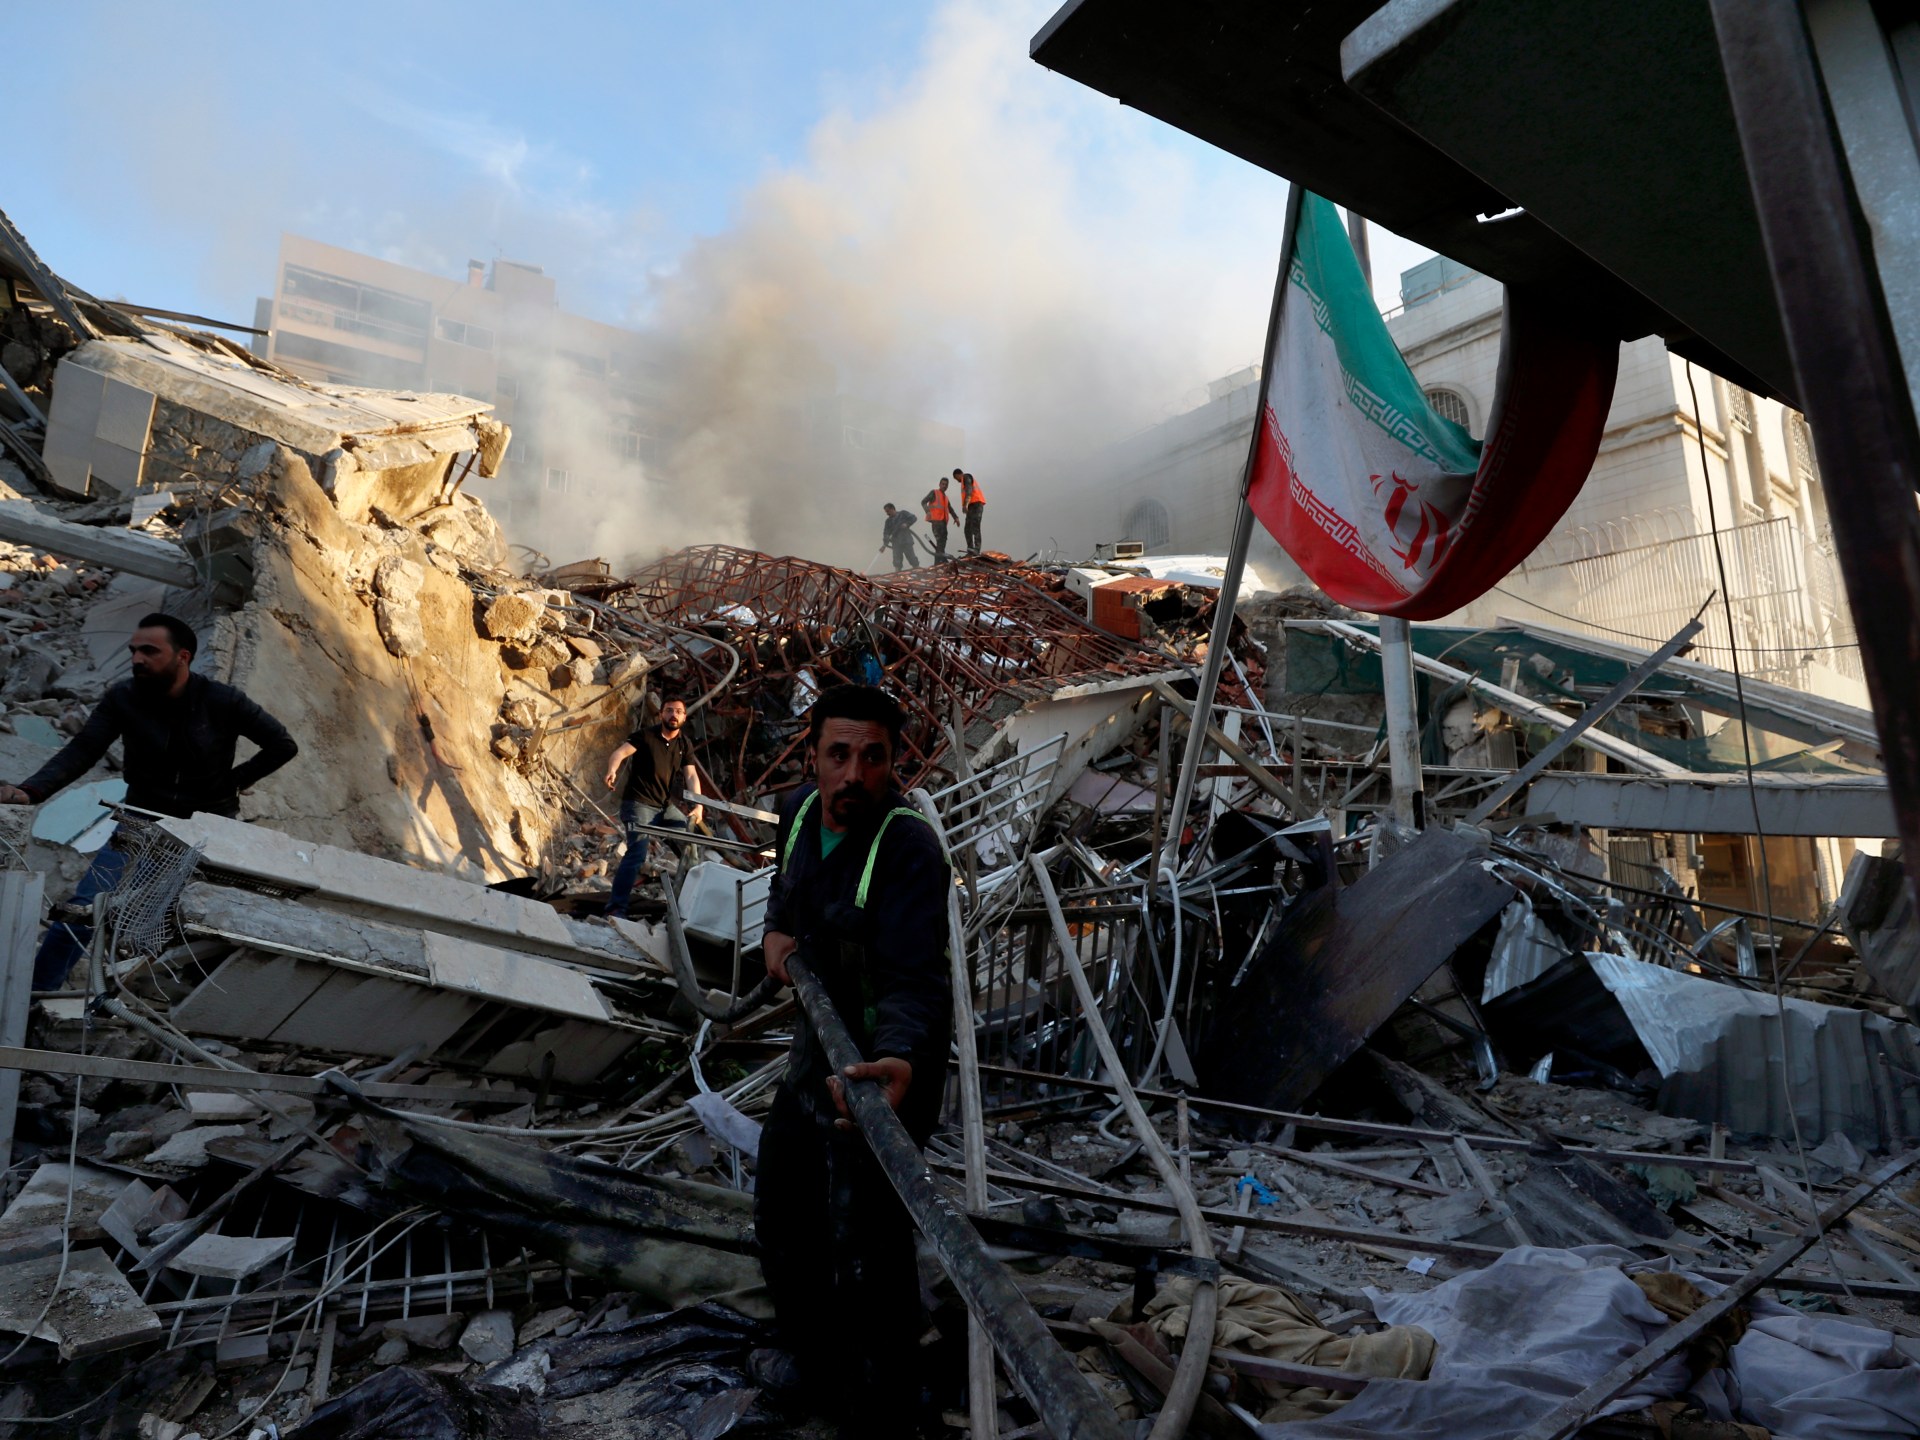 Iran vows response after Israeli attack on consulate kills top commanders